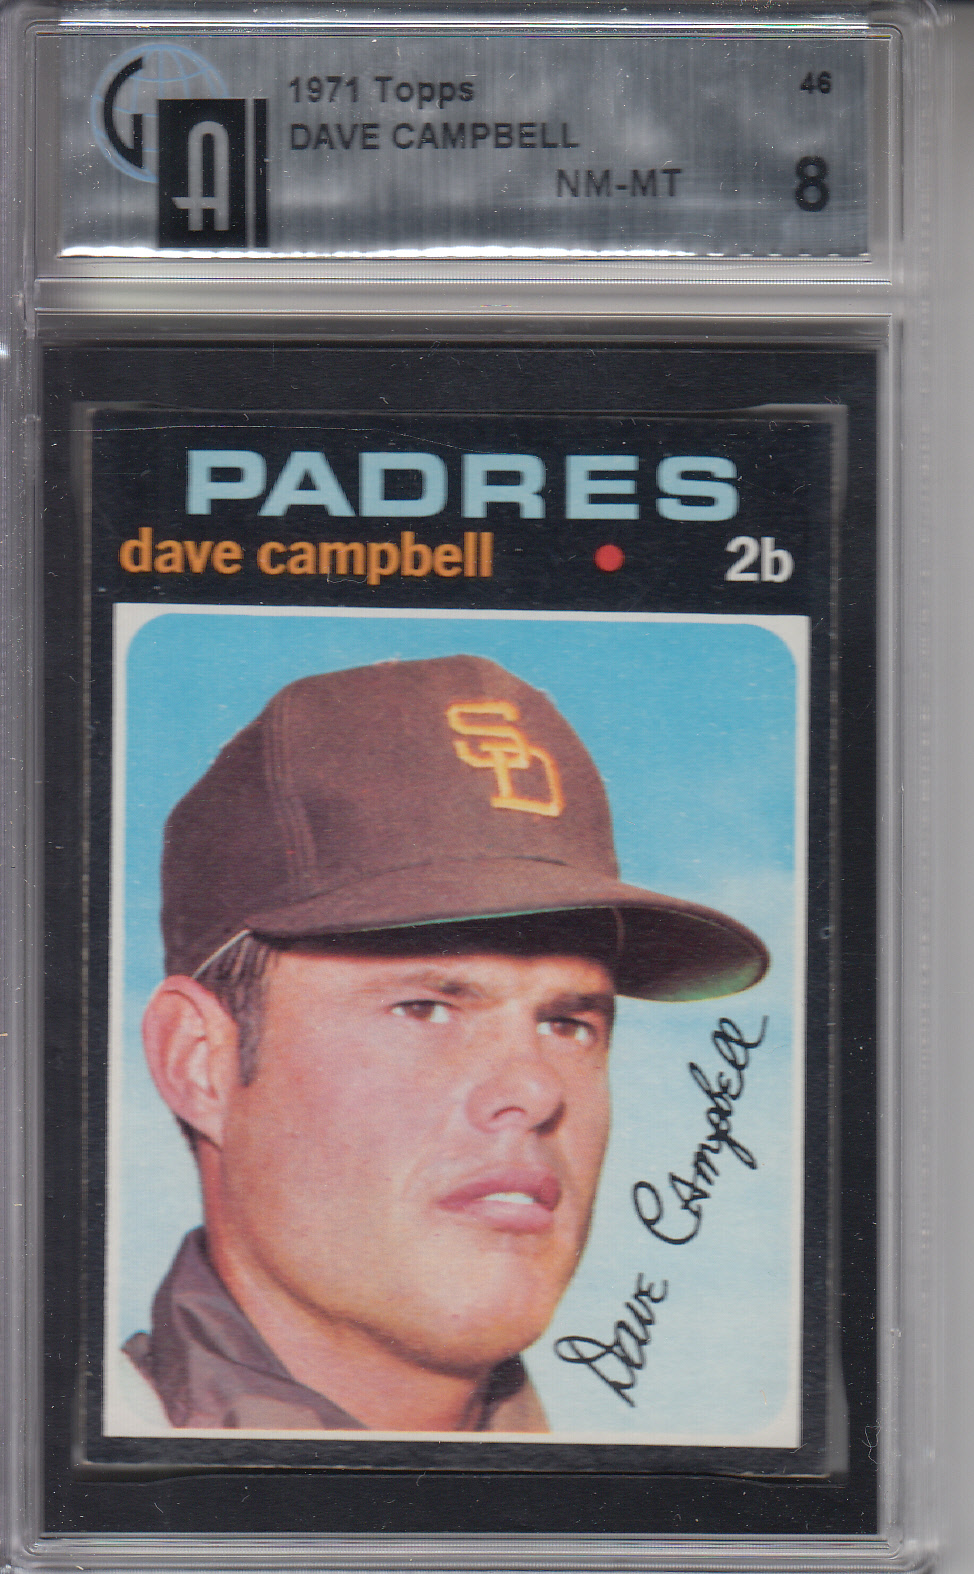 1971 Topps #46 Dave Campbell PADRES GAI 8 NM-MT Z15544